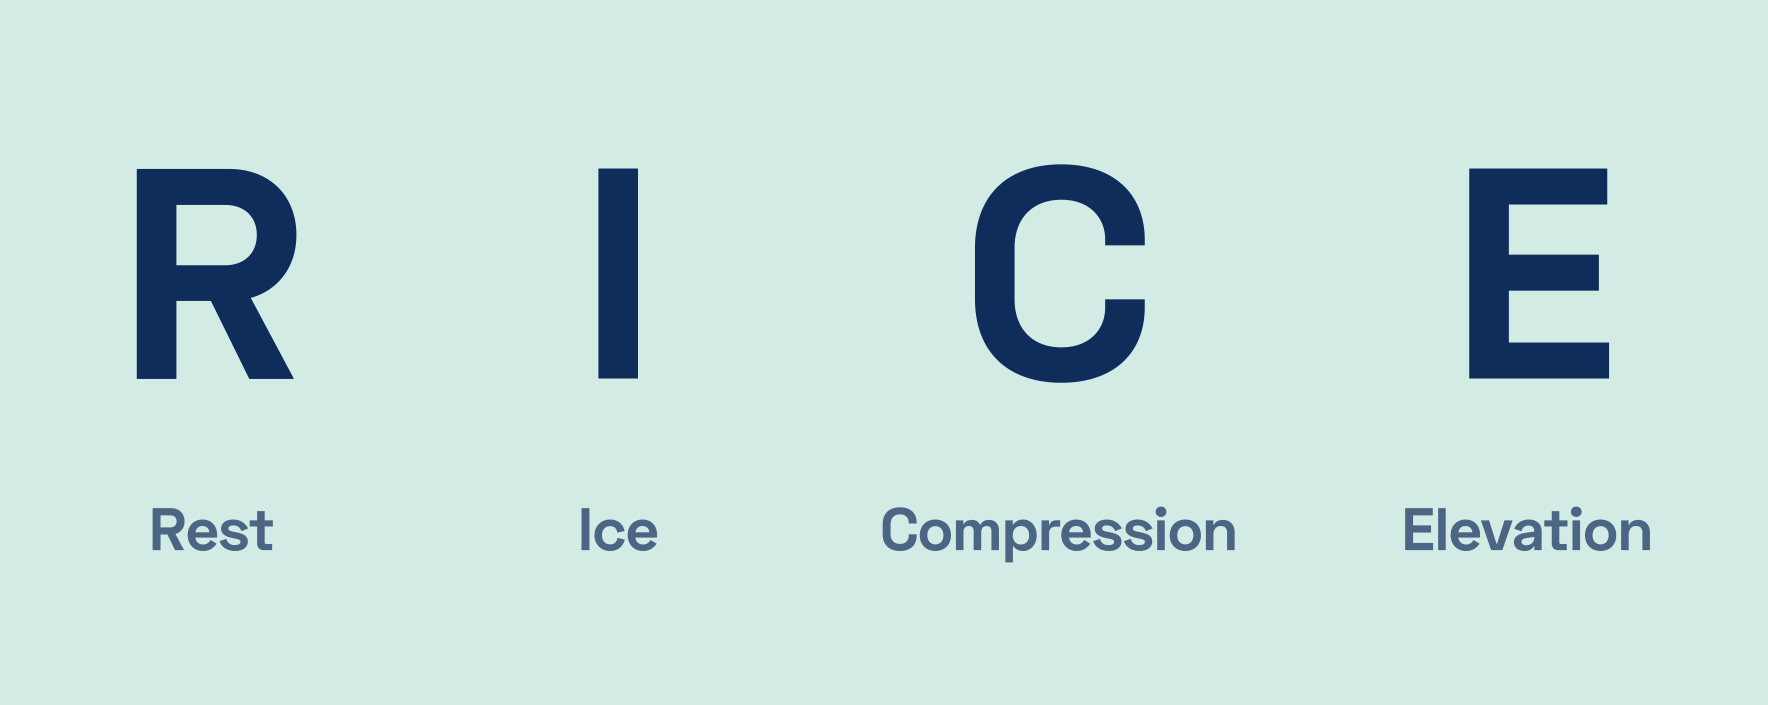 Illustration of acronym RICE: Rest, Ice, Compression, and Elevation protocol.